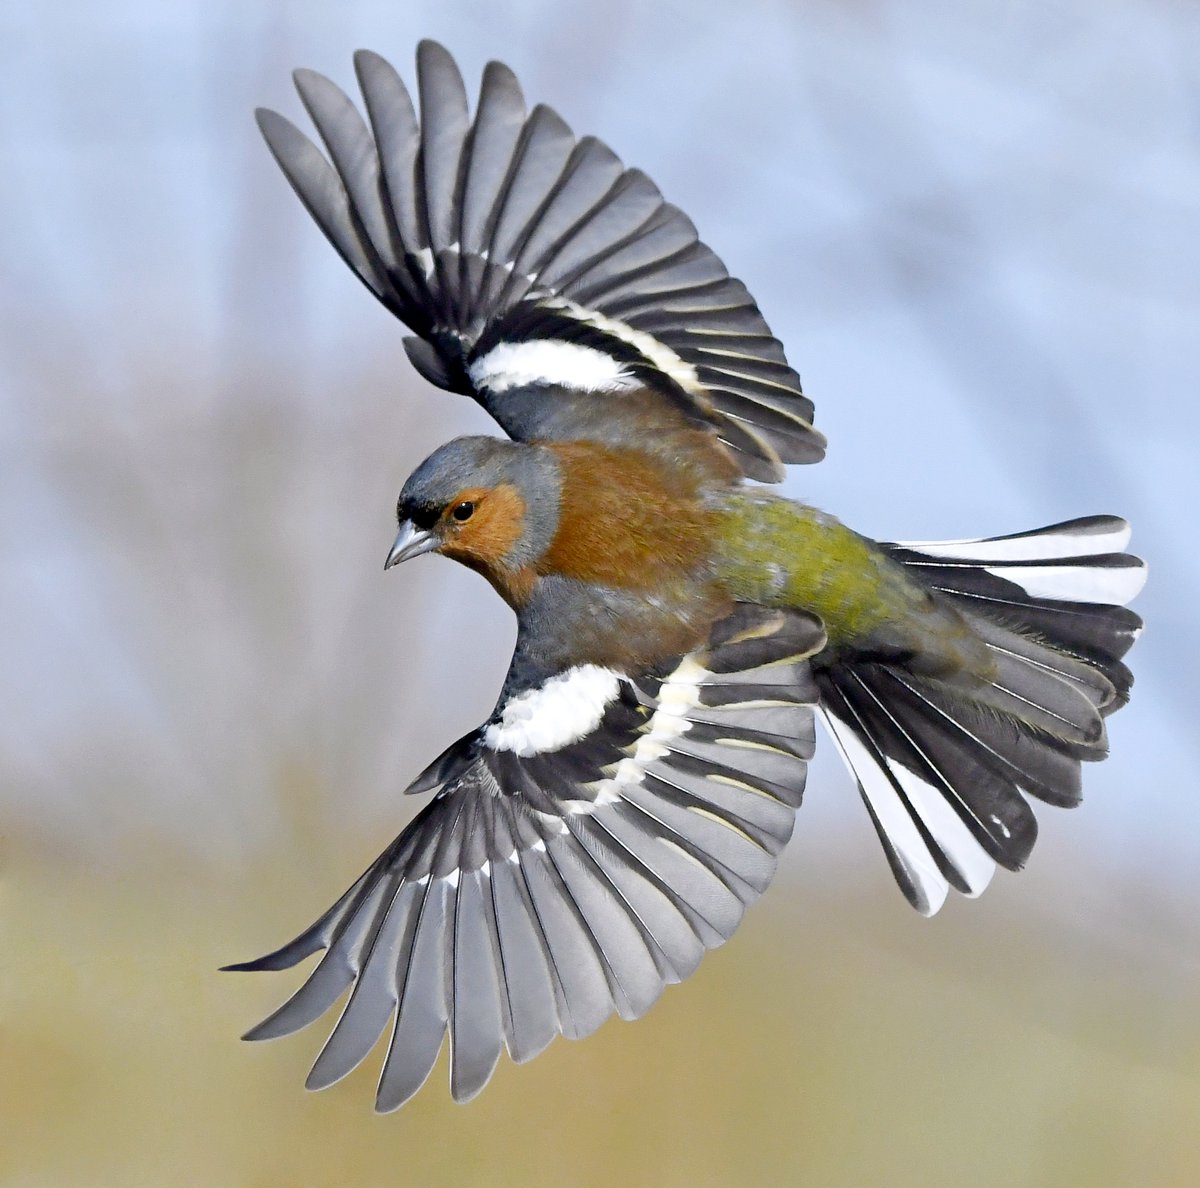 Chaffinch wings.Lapwing in flight.Kingfisher in flight.Frosty Wren.Please vote for your favourite in the poll below 